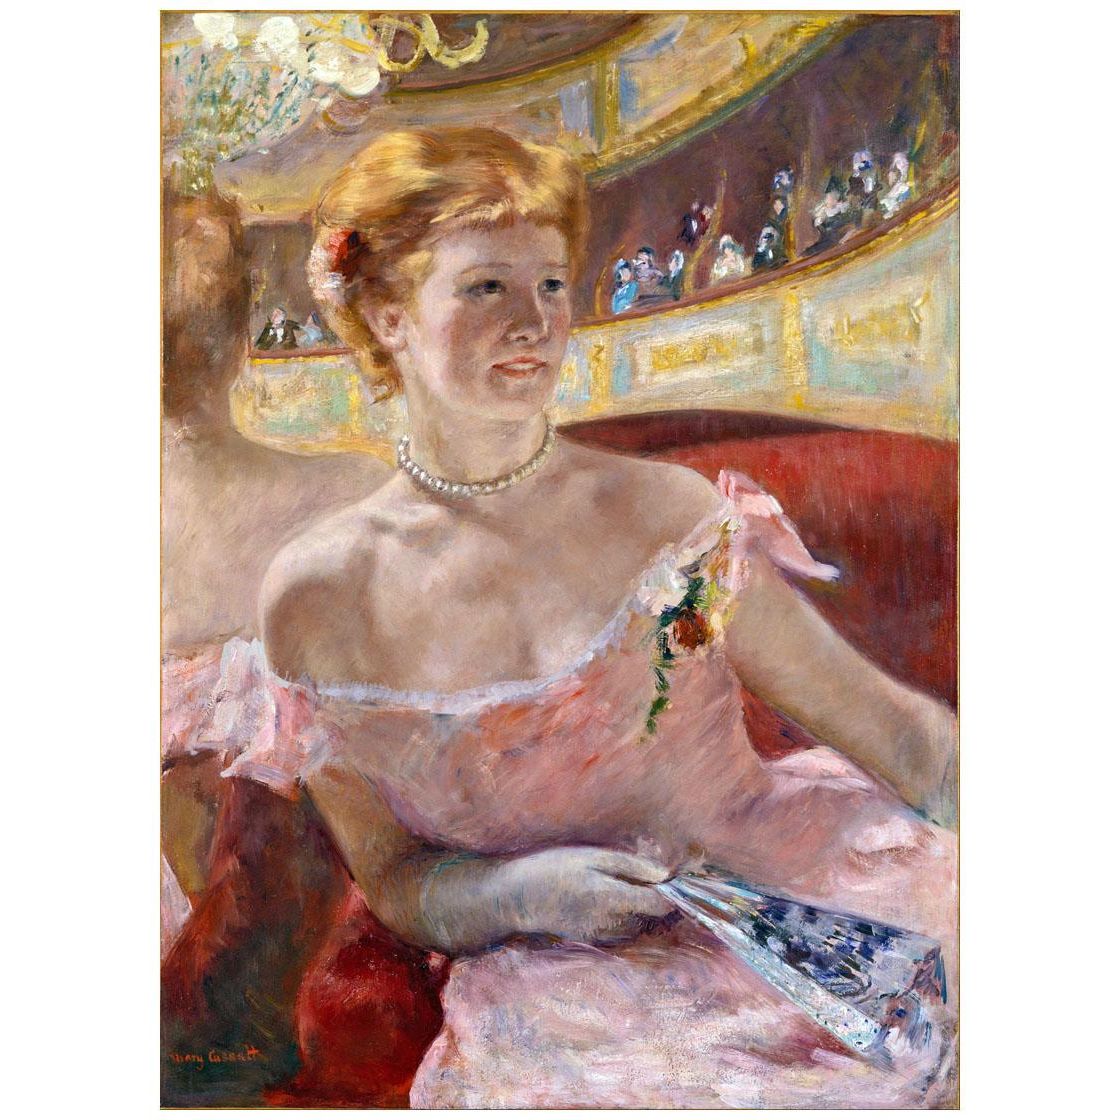 Mary Cassatt. Woman with a Pearl Necklace. 1879. Philadelphia Museum of Art